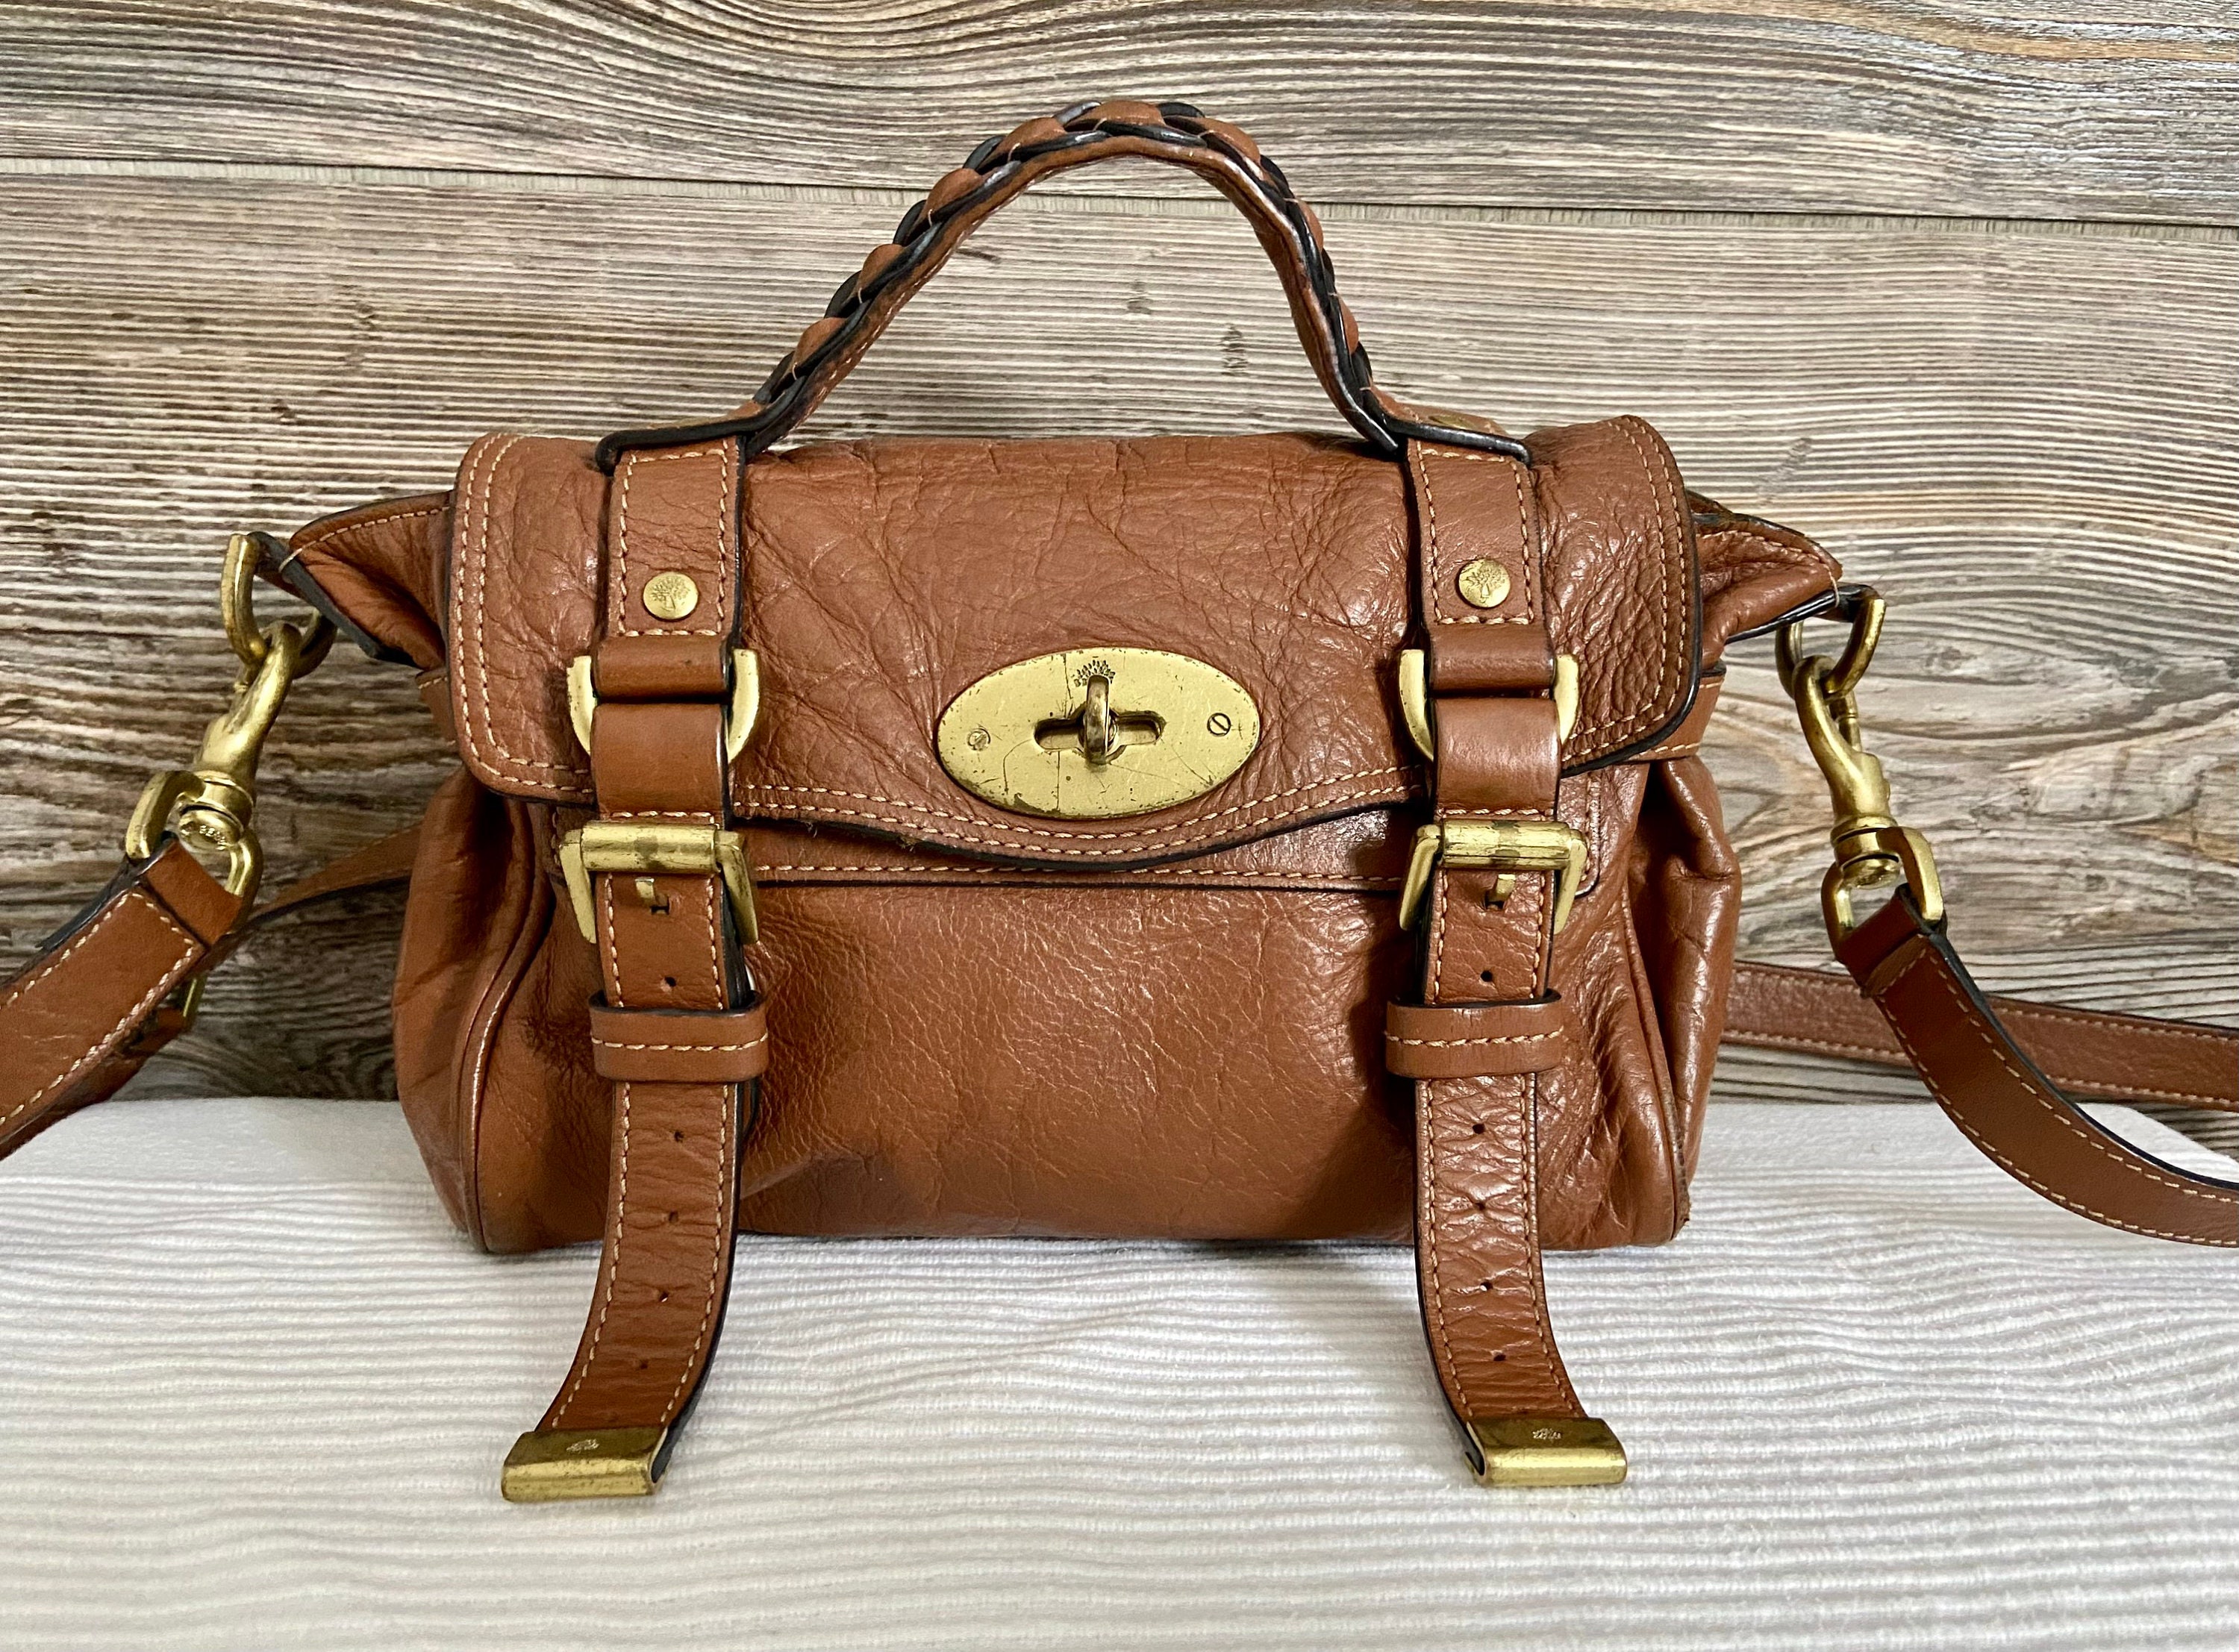 Discontinued Mulberry Style? : r/handbags